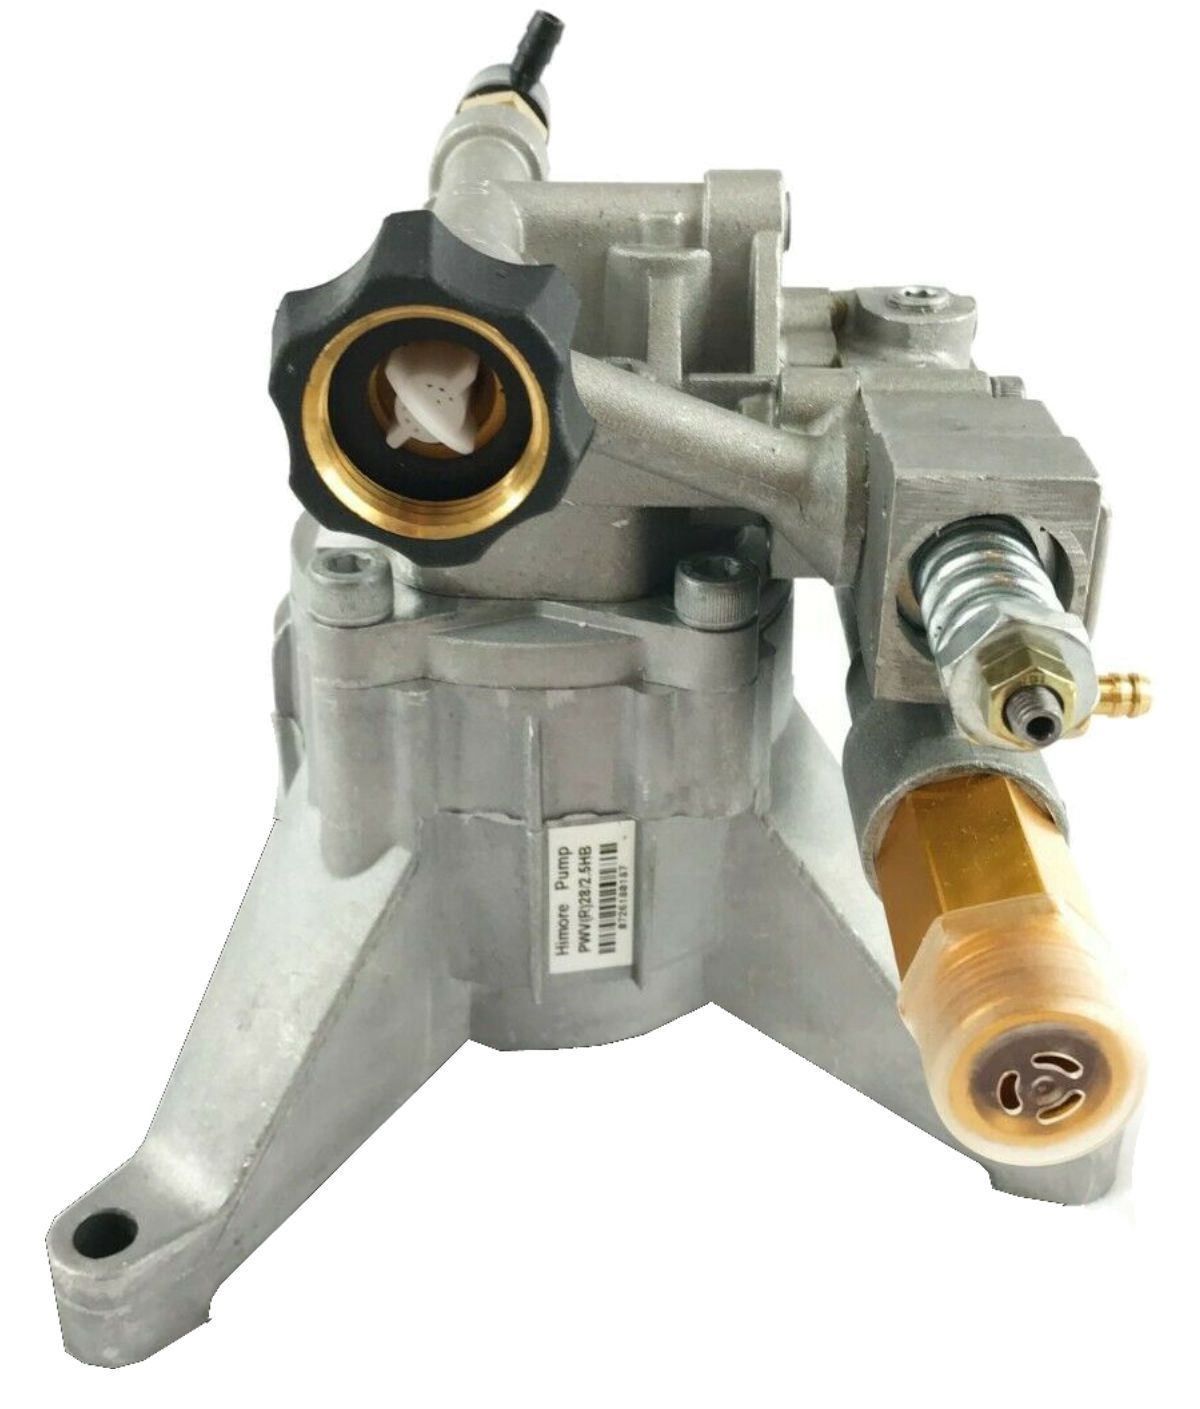 2700 PSI PRESSURE WASHER WATER PUMP Campbell Hausfeld PW2030V1LE - AE-Power